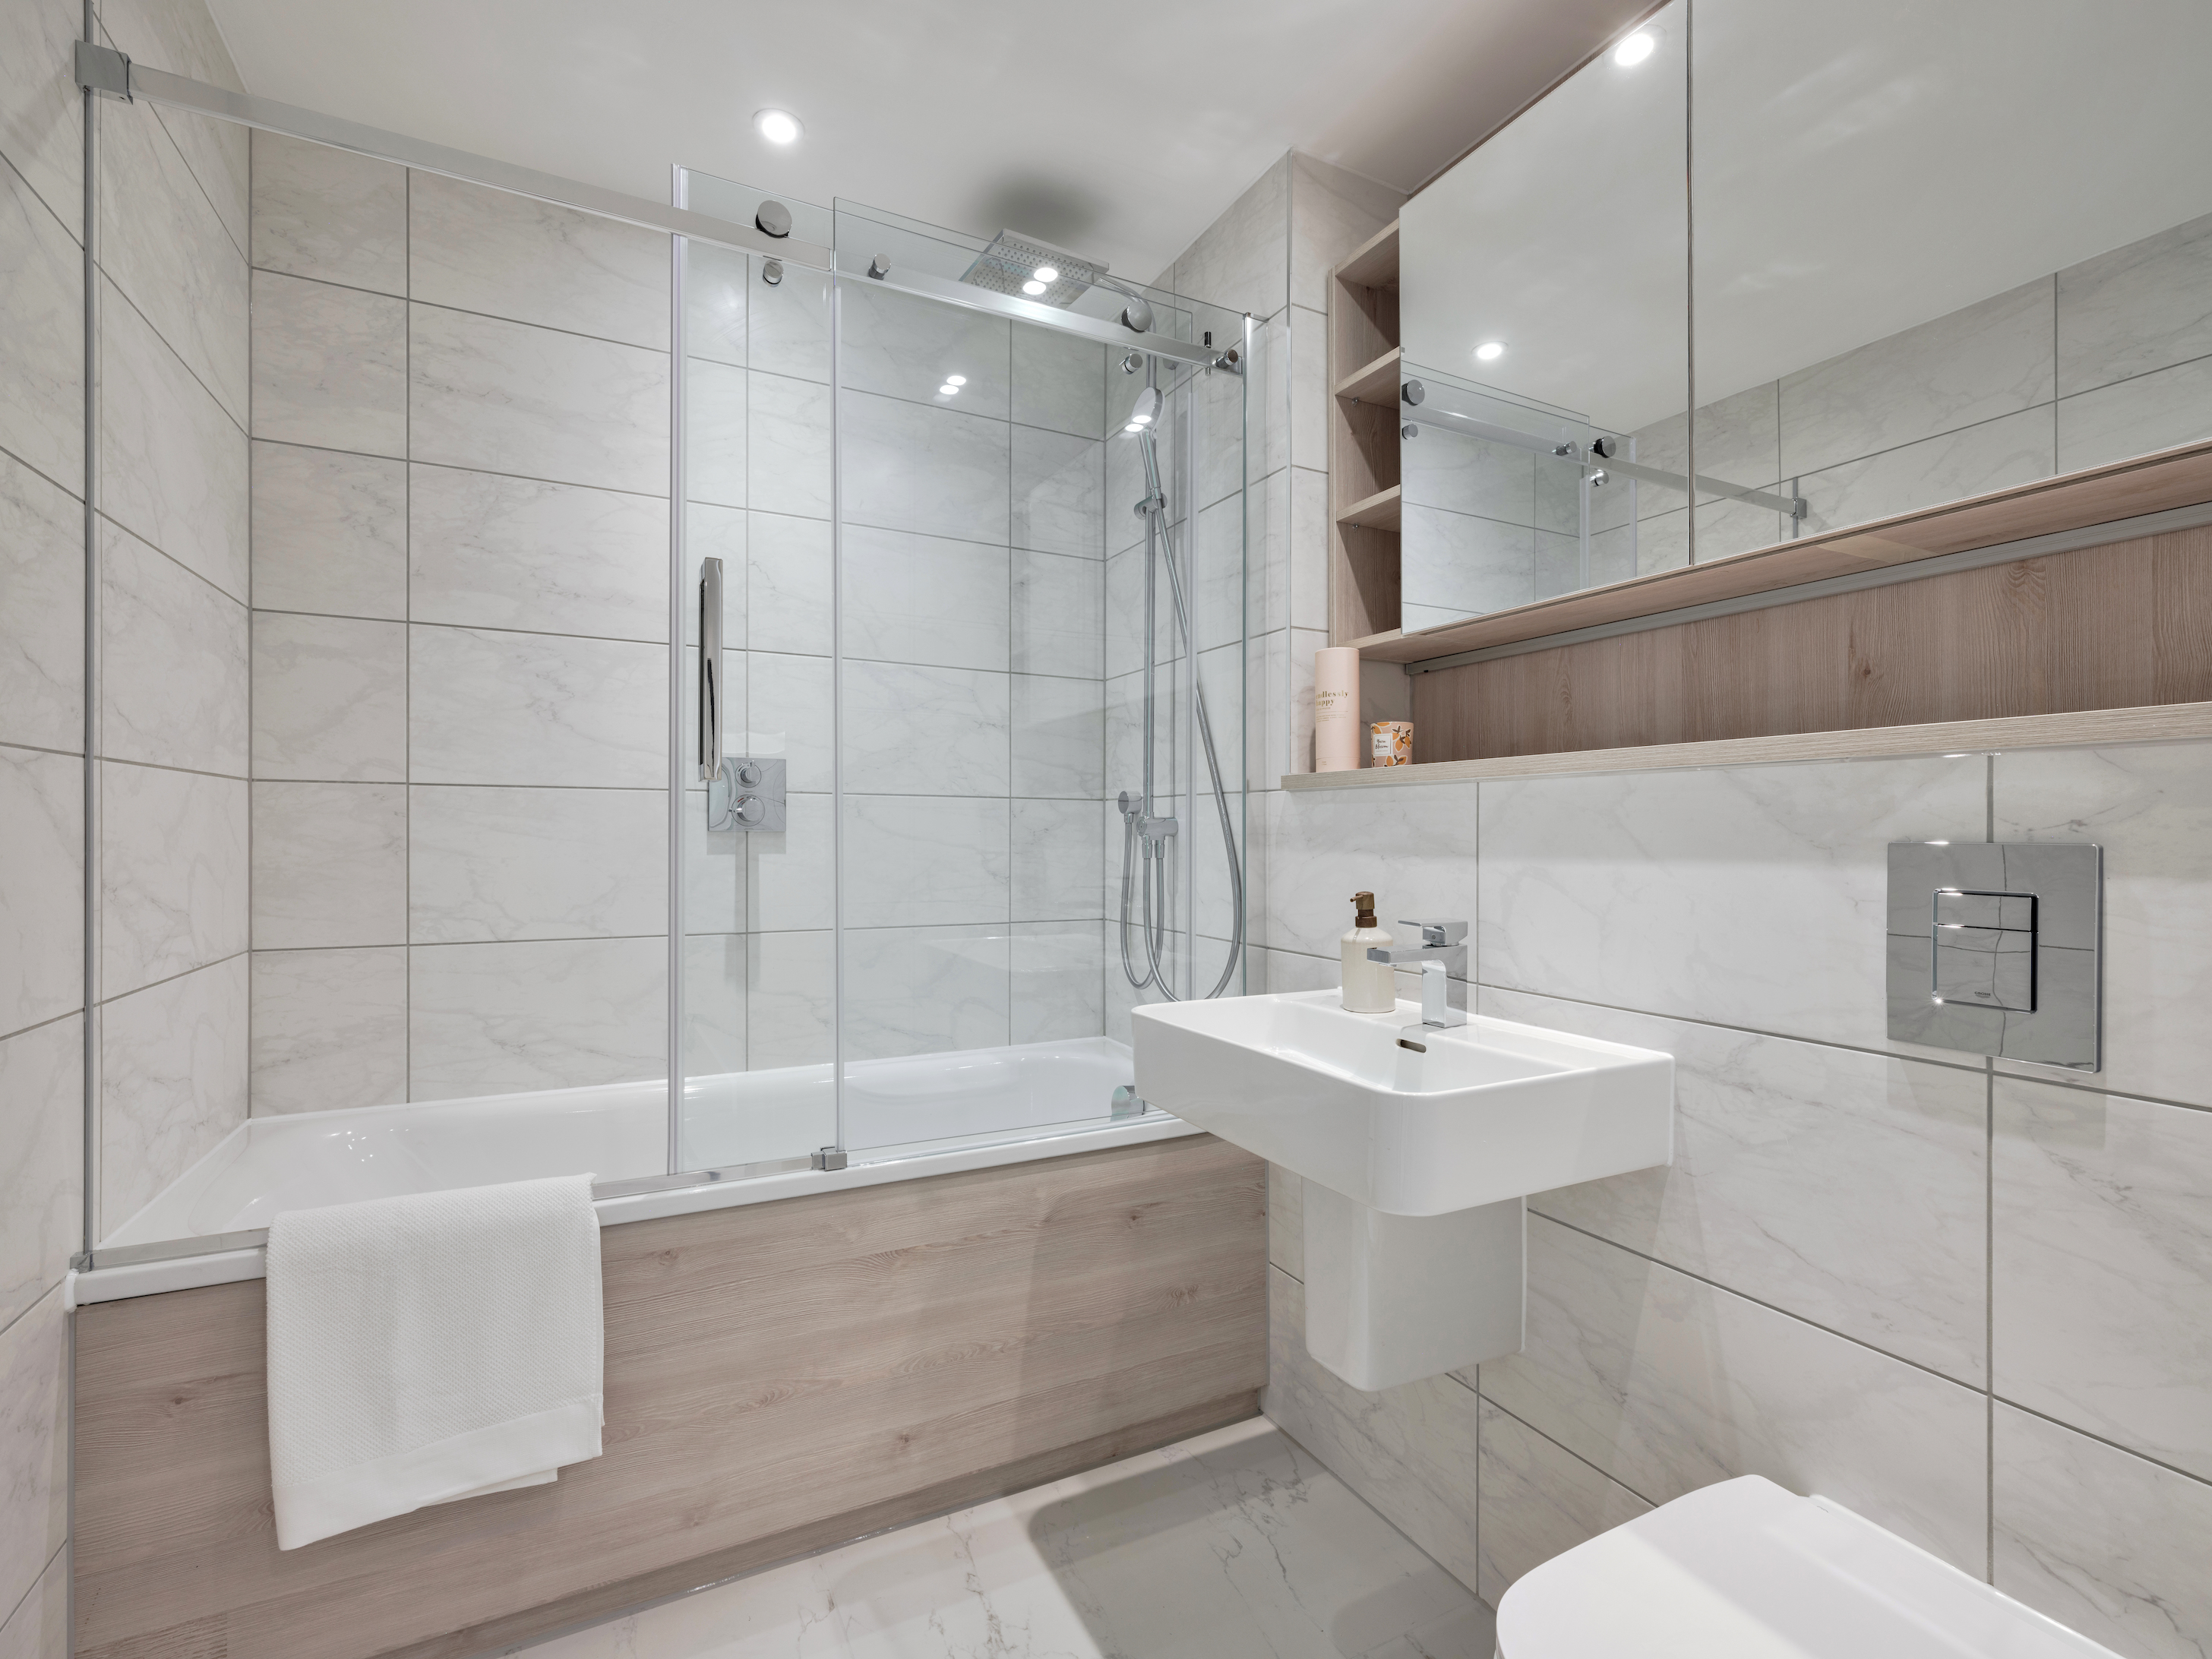 Apartments to Rent by Cortland in Cortland at Colliers Yard, Salford, M3, bathroom